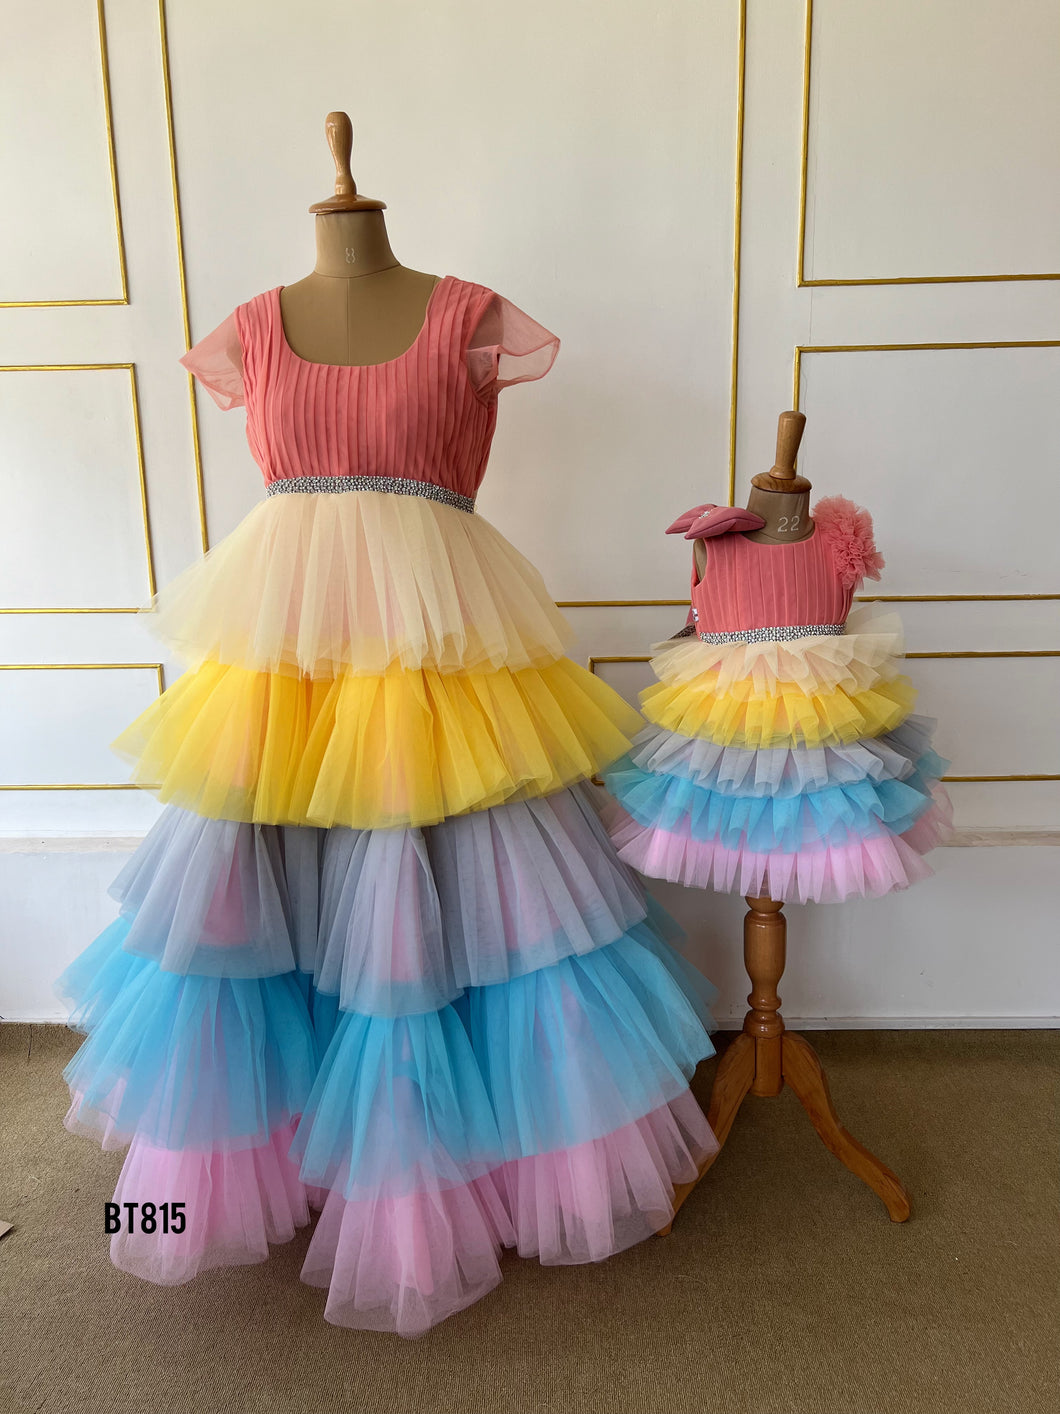 BT815 Enchanted Pastel Princess Gown - Make Every Moment Magical